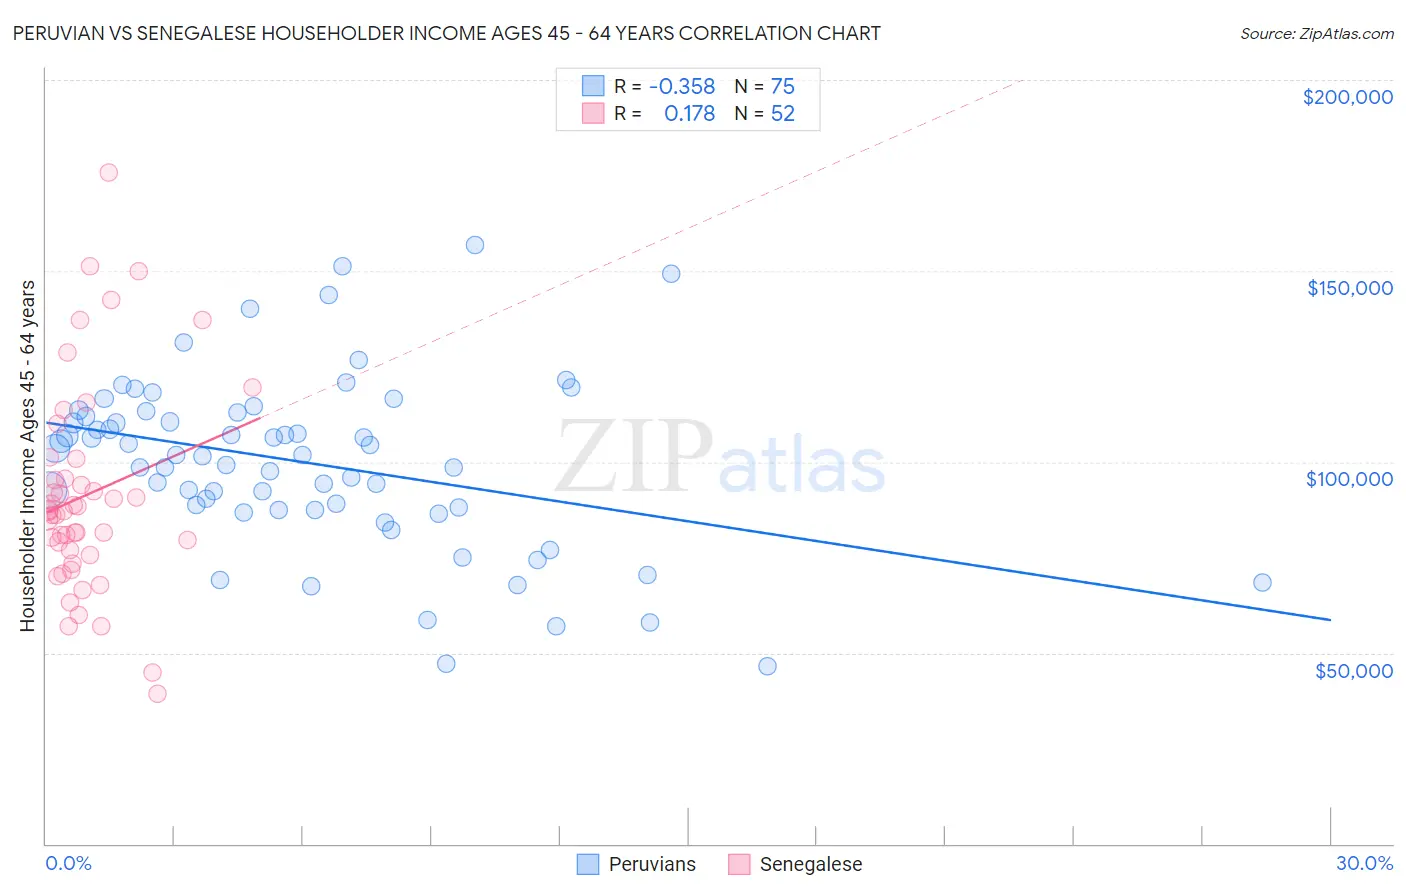 Peruvian vs Senegalese Householder Income Ages 45 - 64 years